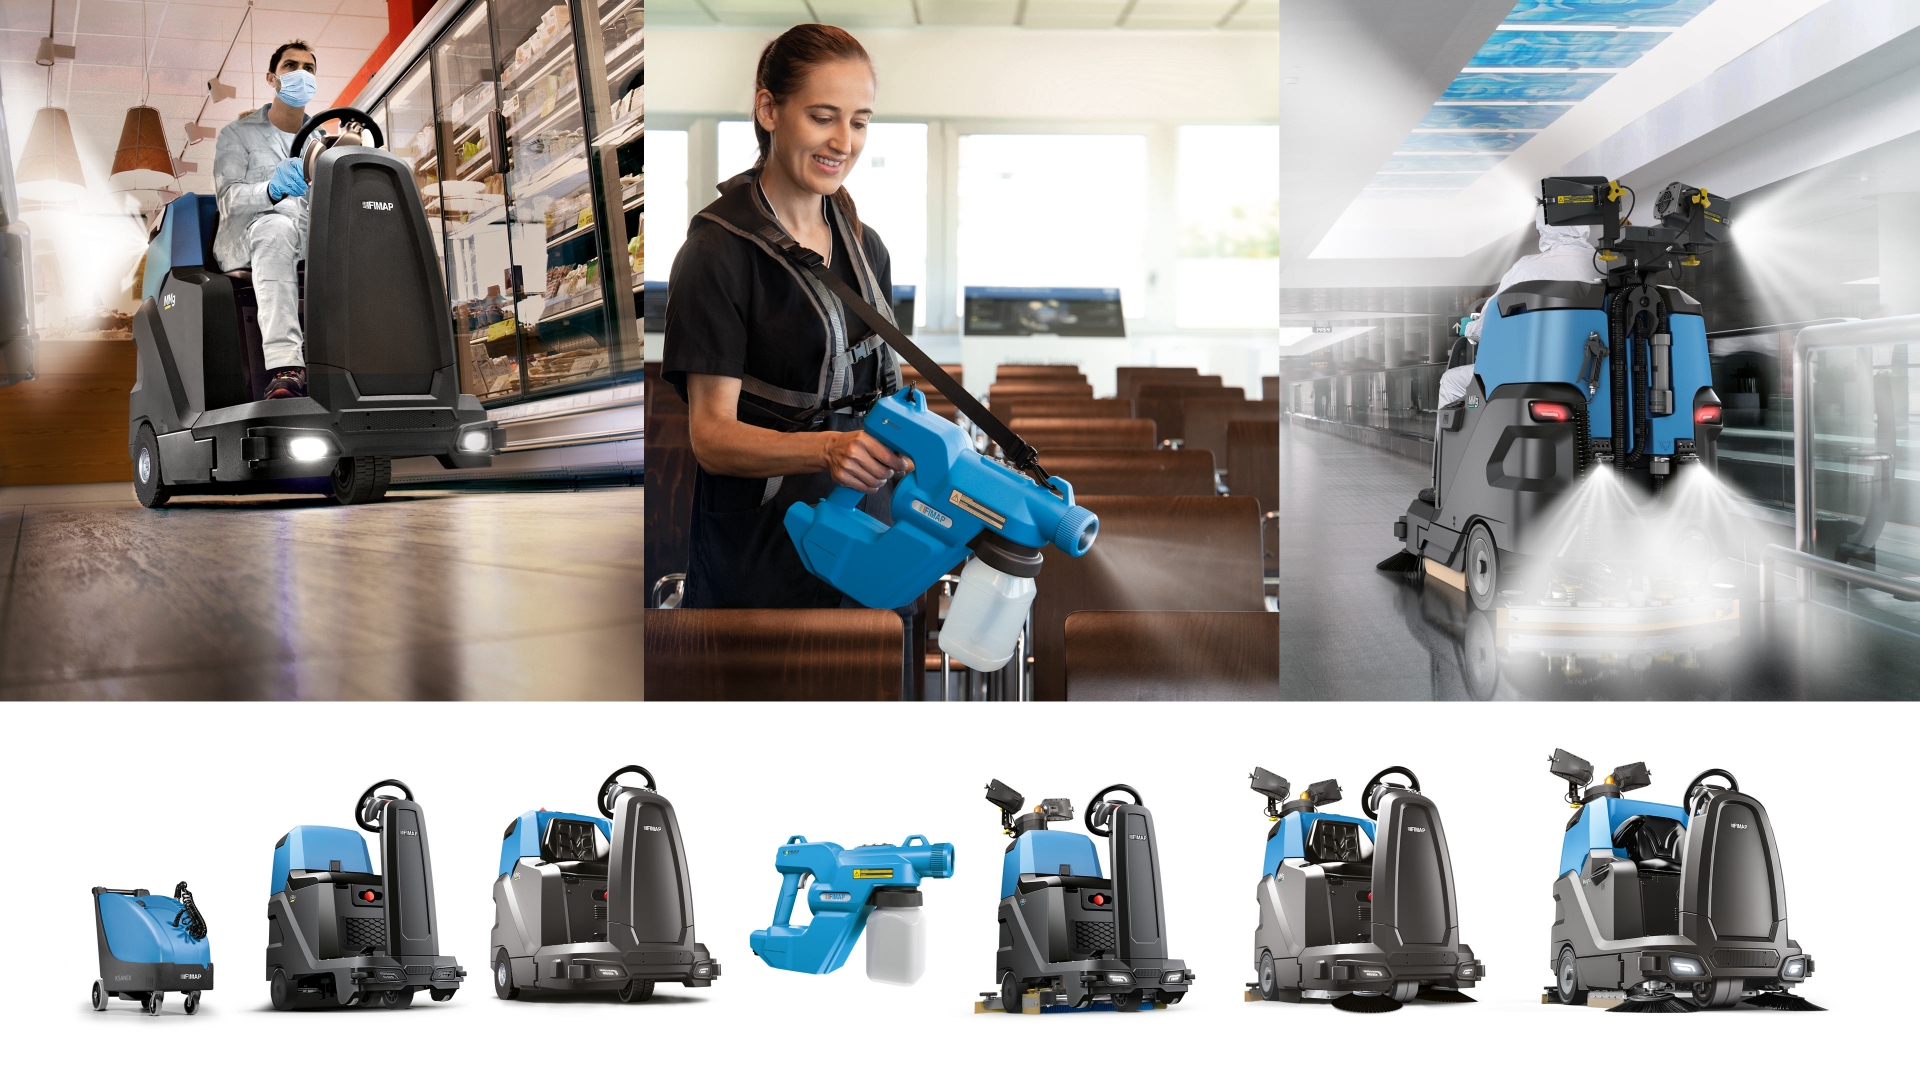 Going beyond cleaning: Fimap presents the new range of machines to spray sanitizing solutions